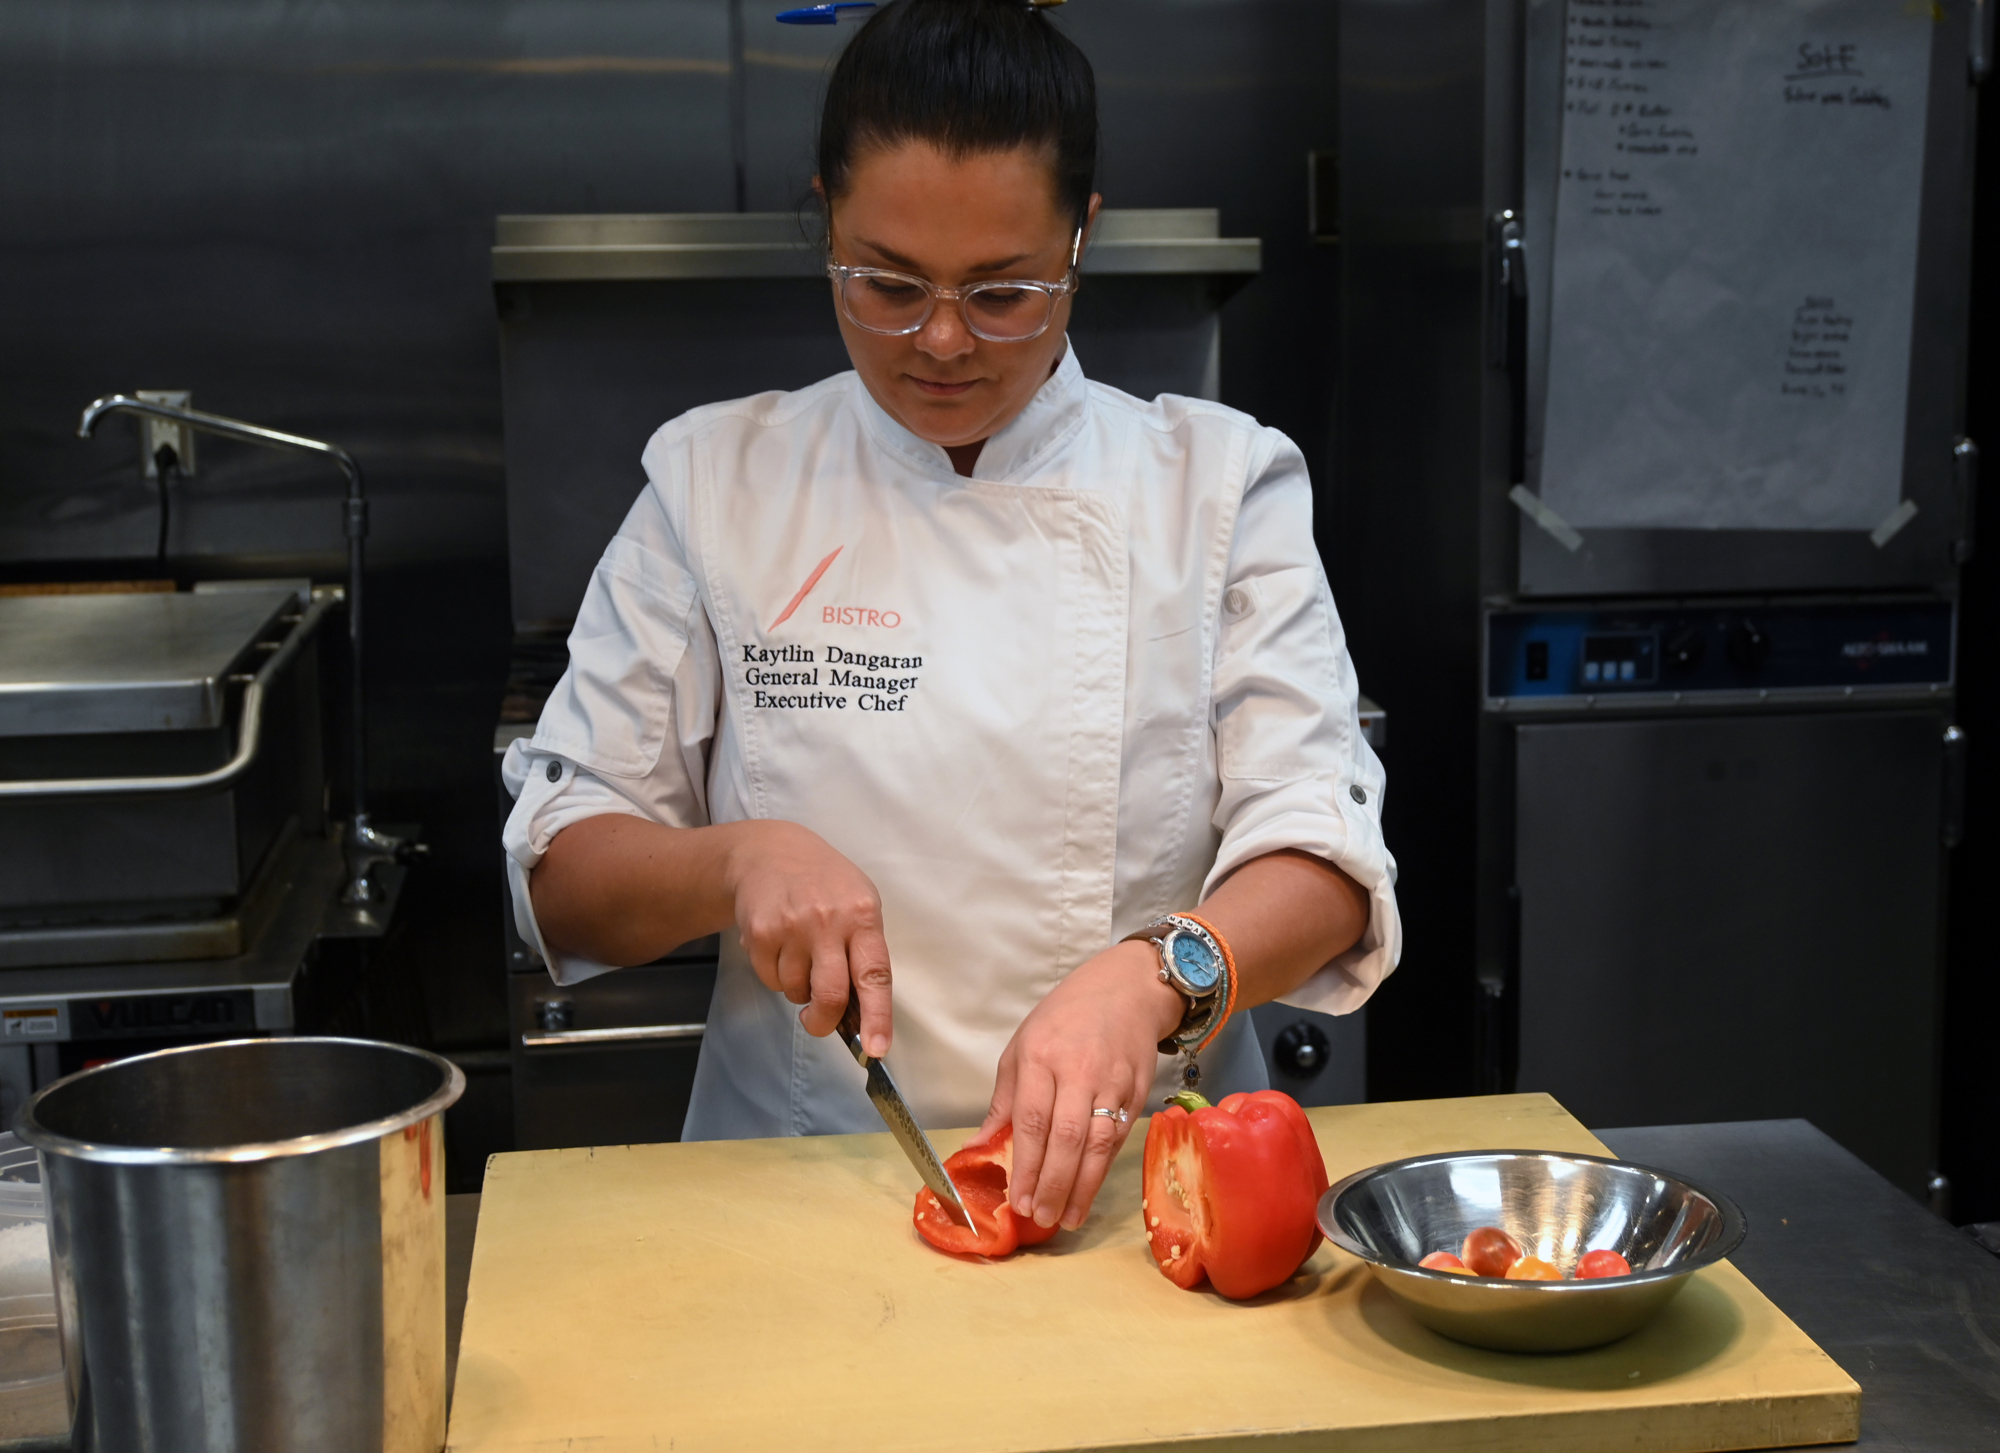 Sarasota's fresh produce — including tomatoes — are among Chef Kaytlin's favorite local ingredients. (Photo: Spencer Fordin)